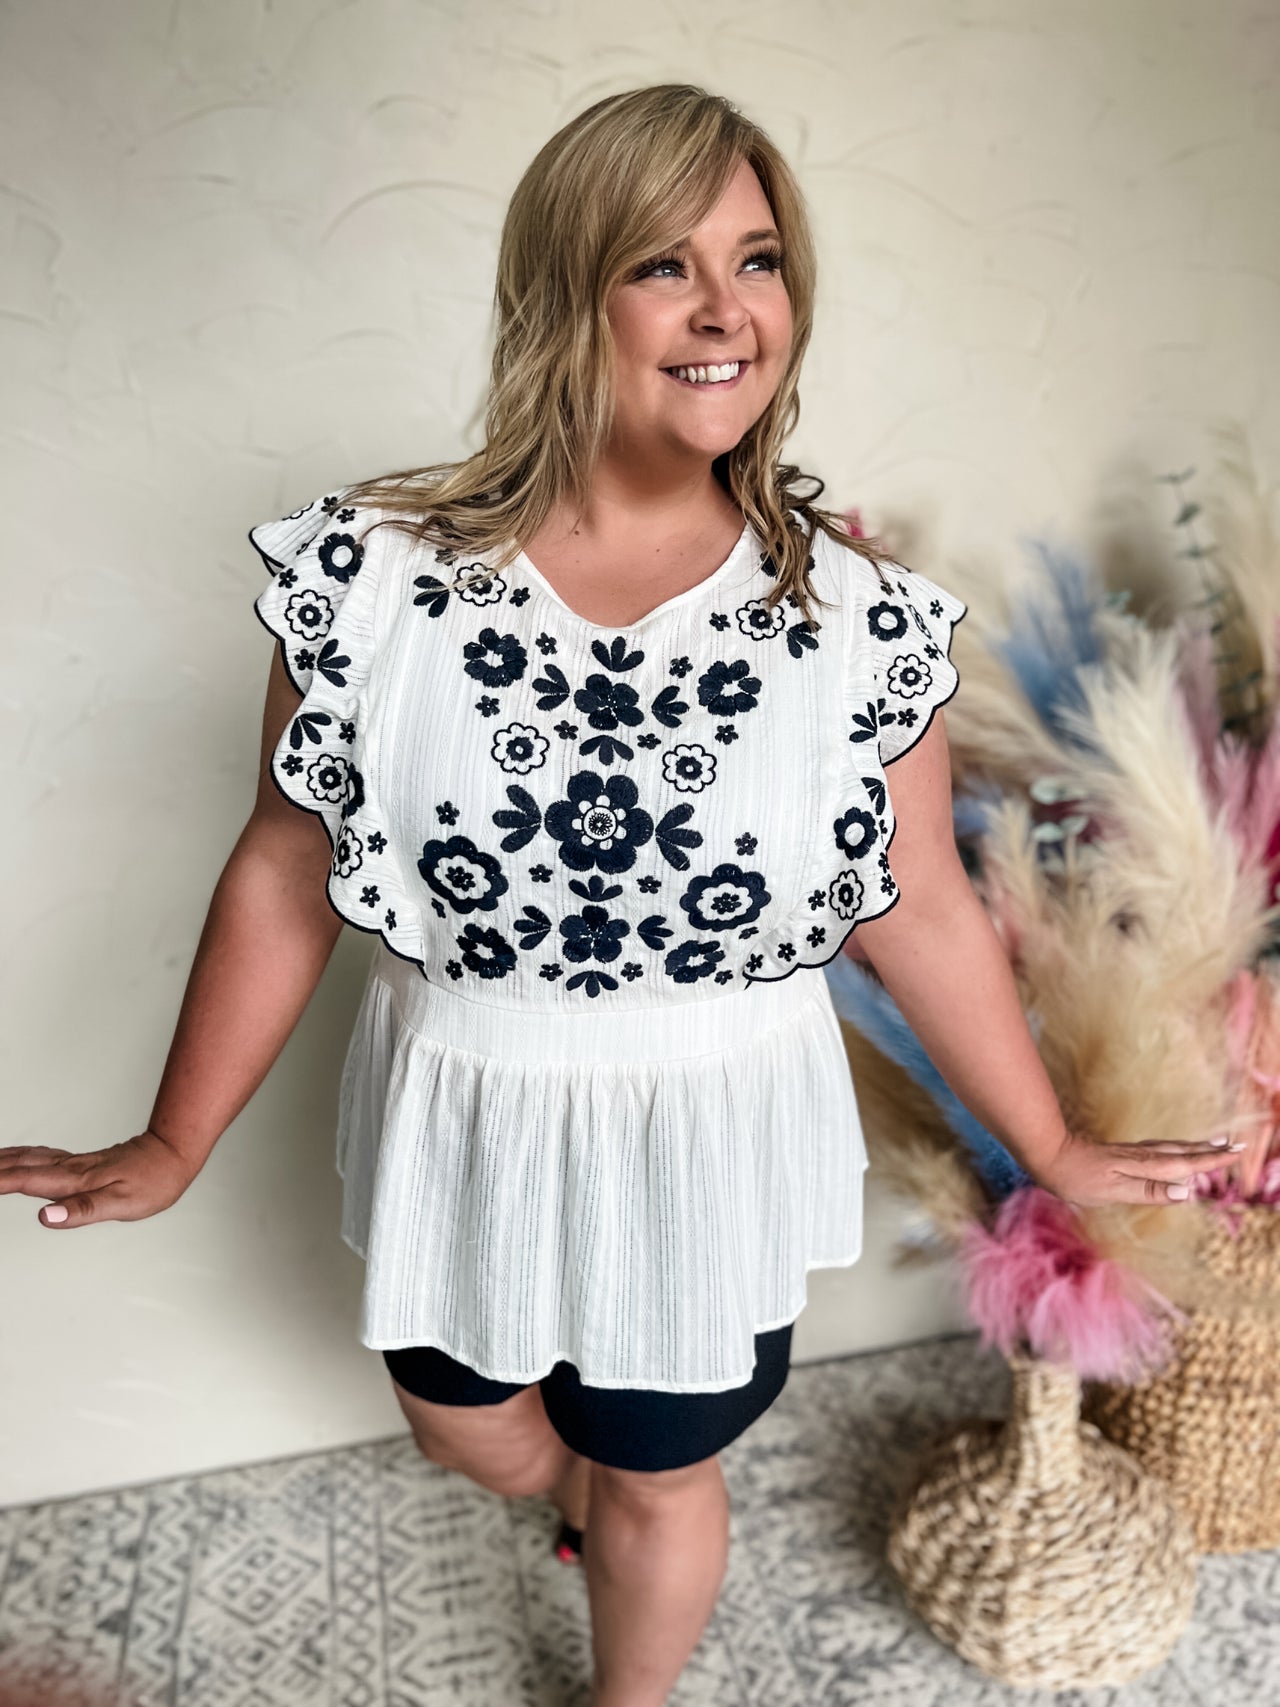 Seeing Black & White Floral Embroidered Top